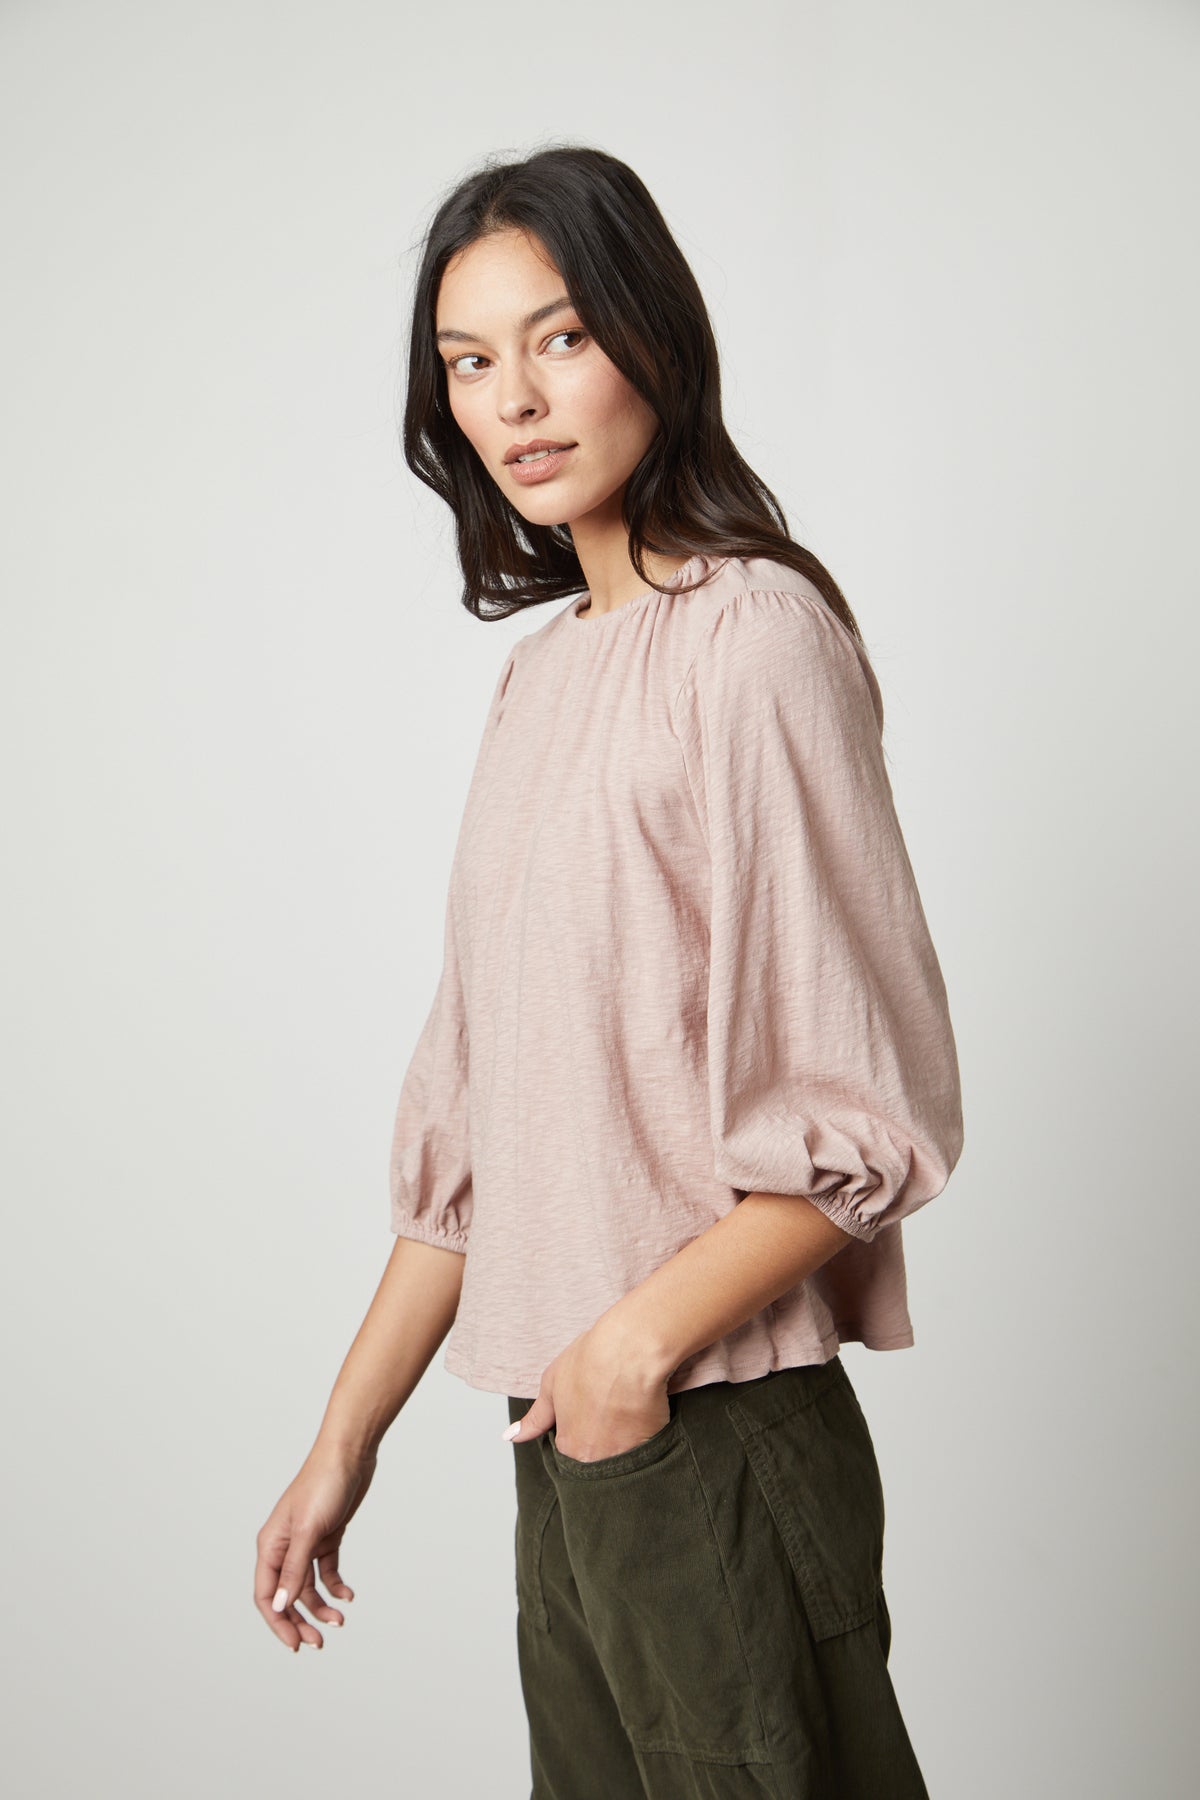 The model is wearing a Velvet by Graham & Spencer JULIE 3/4 SLEEVE TEE with a ruffled sleeve.-26727740408001